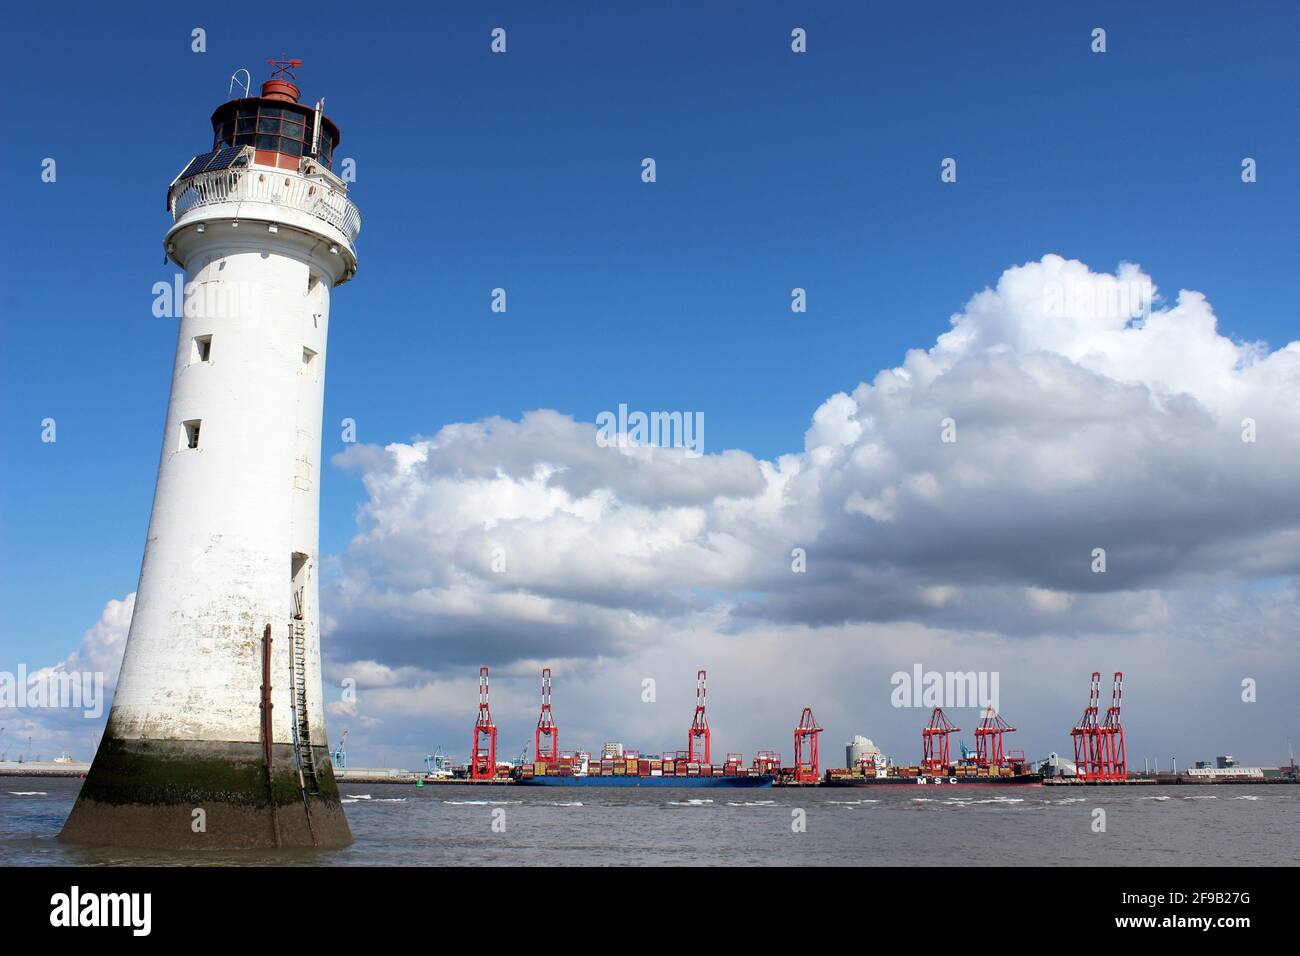 New Brighton Lighthouse with views across the River Mersey to Liverpool Docks and Liverpool2 Container Cranes Stock Photo